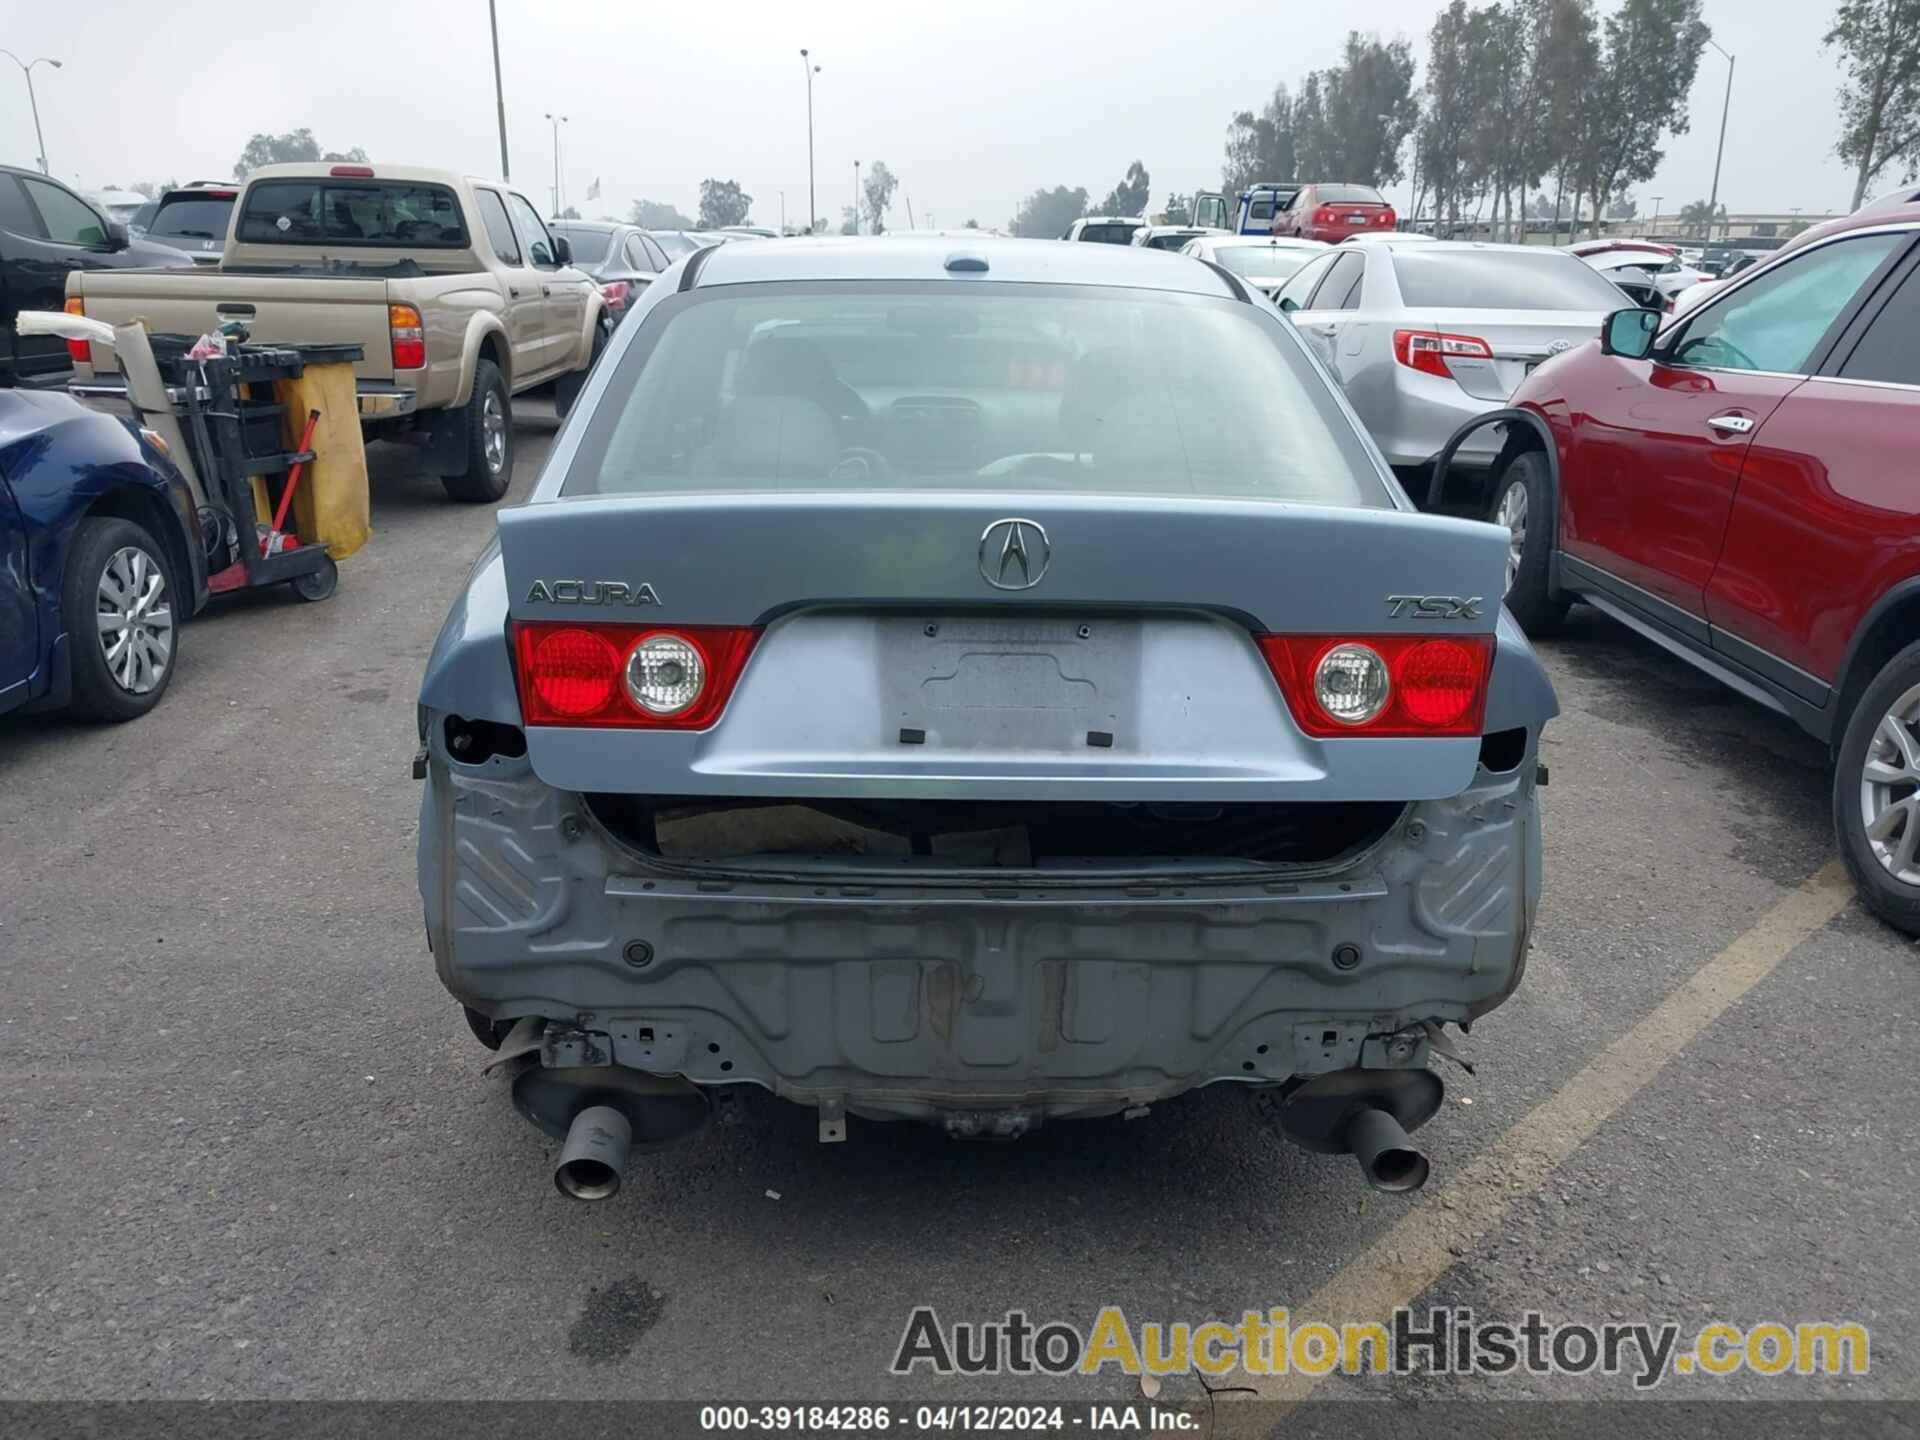 ACURA TSX, JH4CL96925C019295